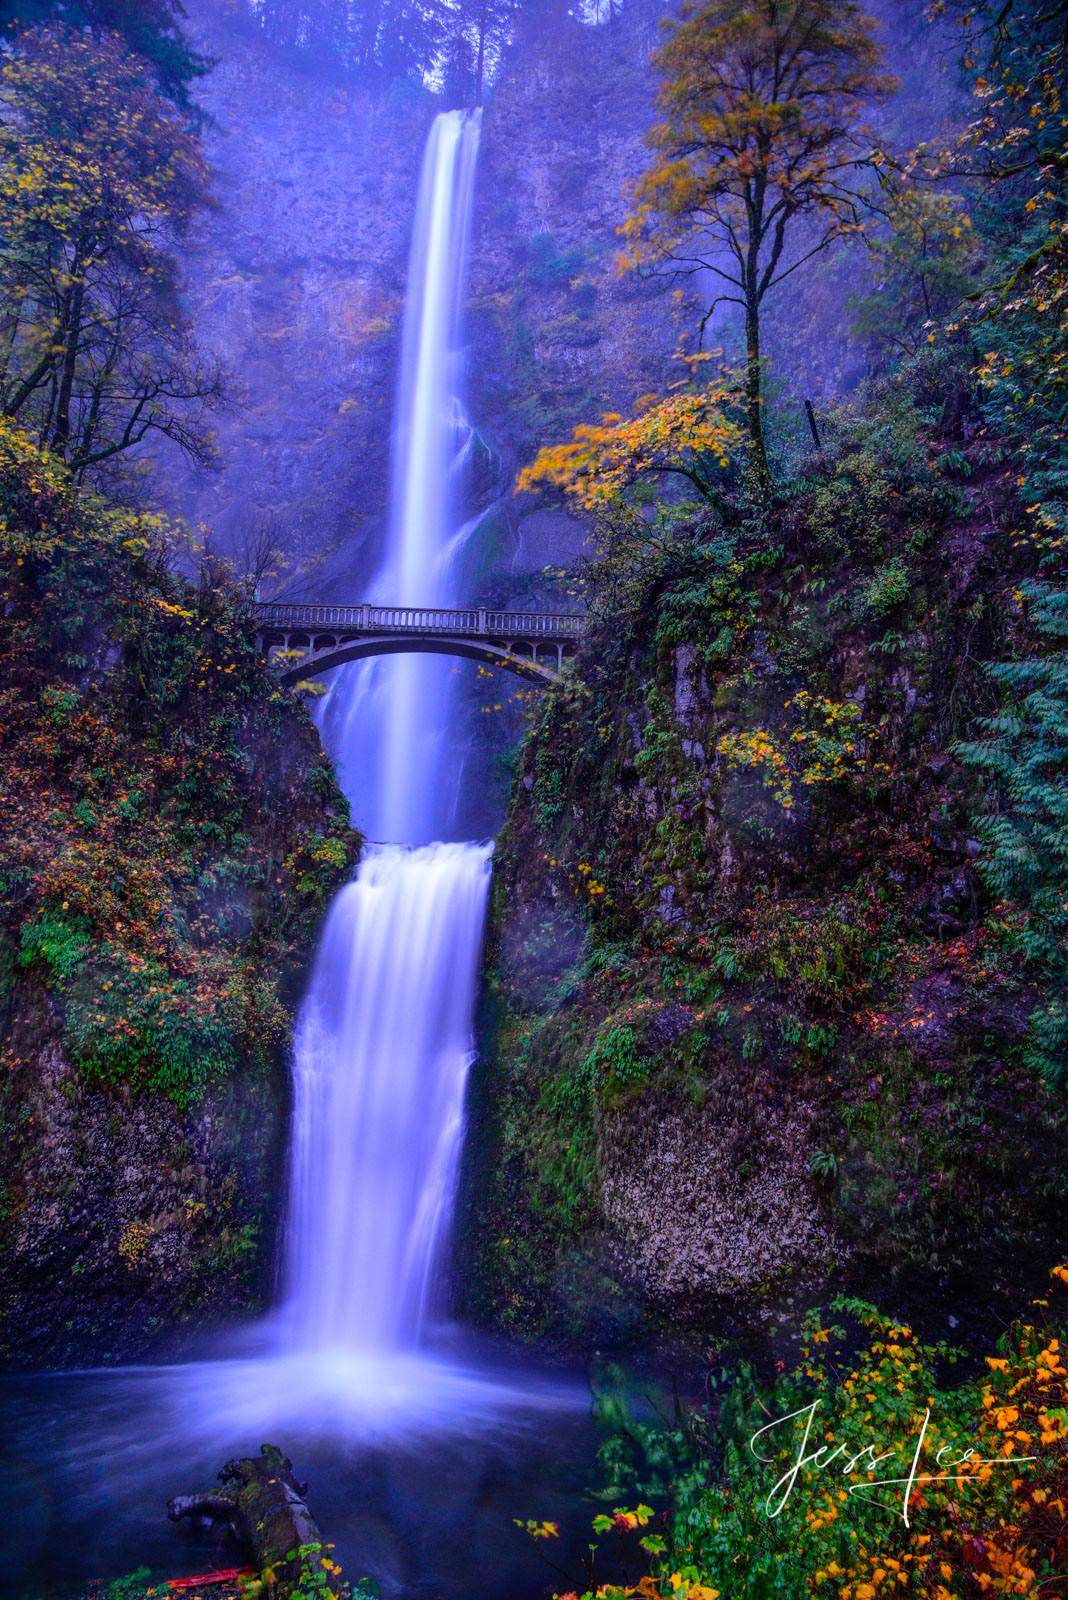 Multnomah Falls in Autumn, a limited edition of 100 prints. bring the beauty home, order today.